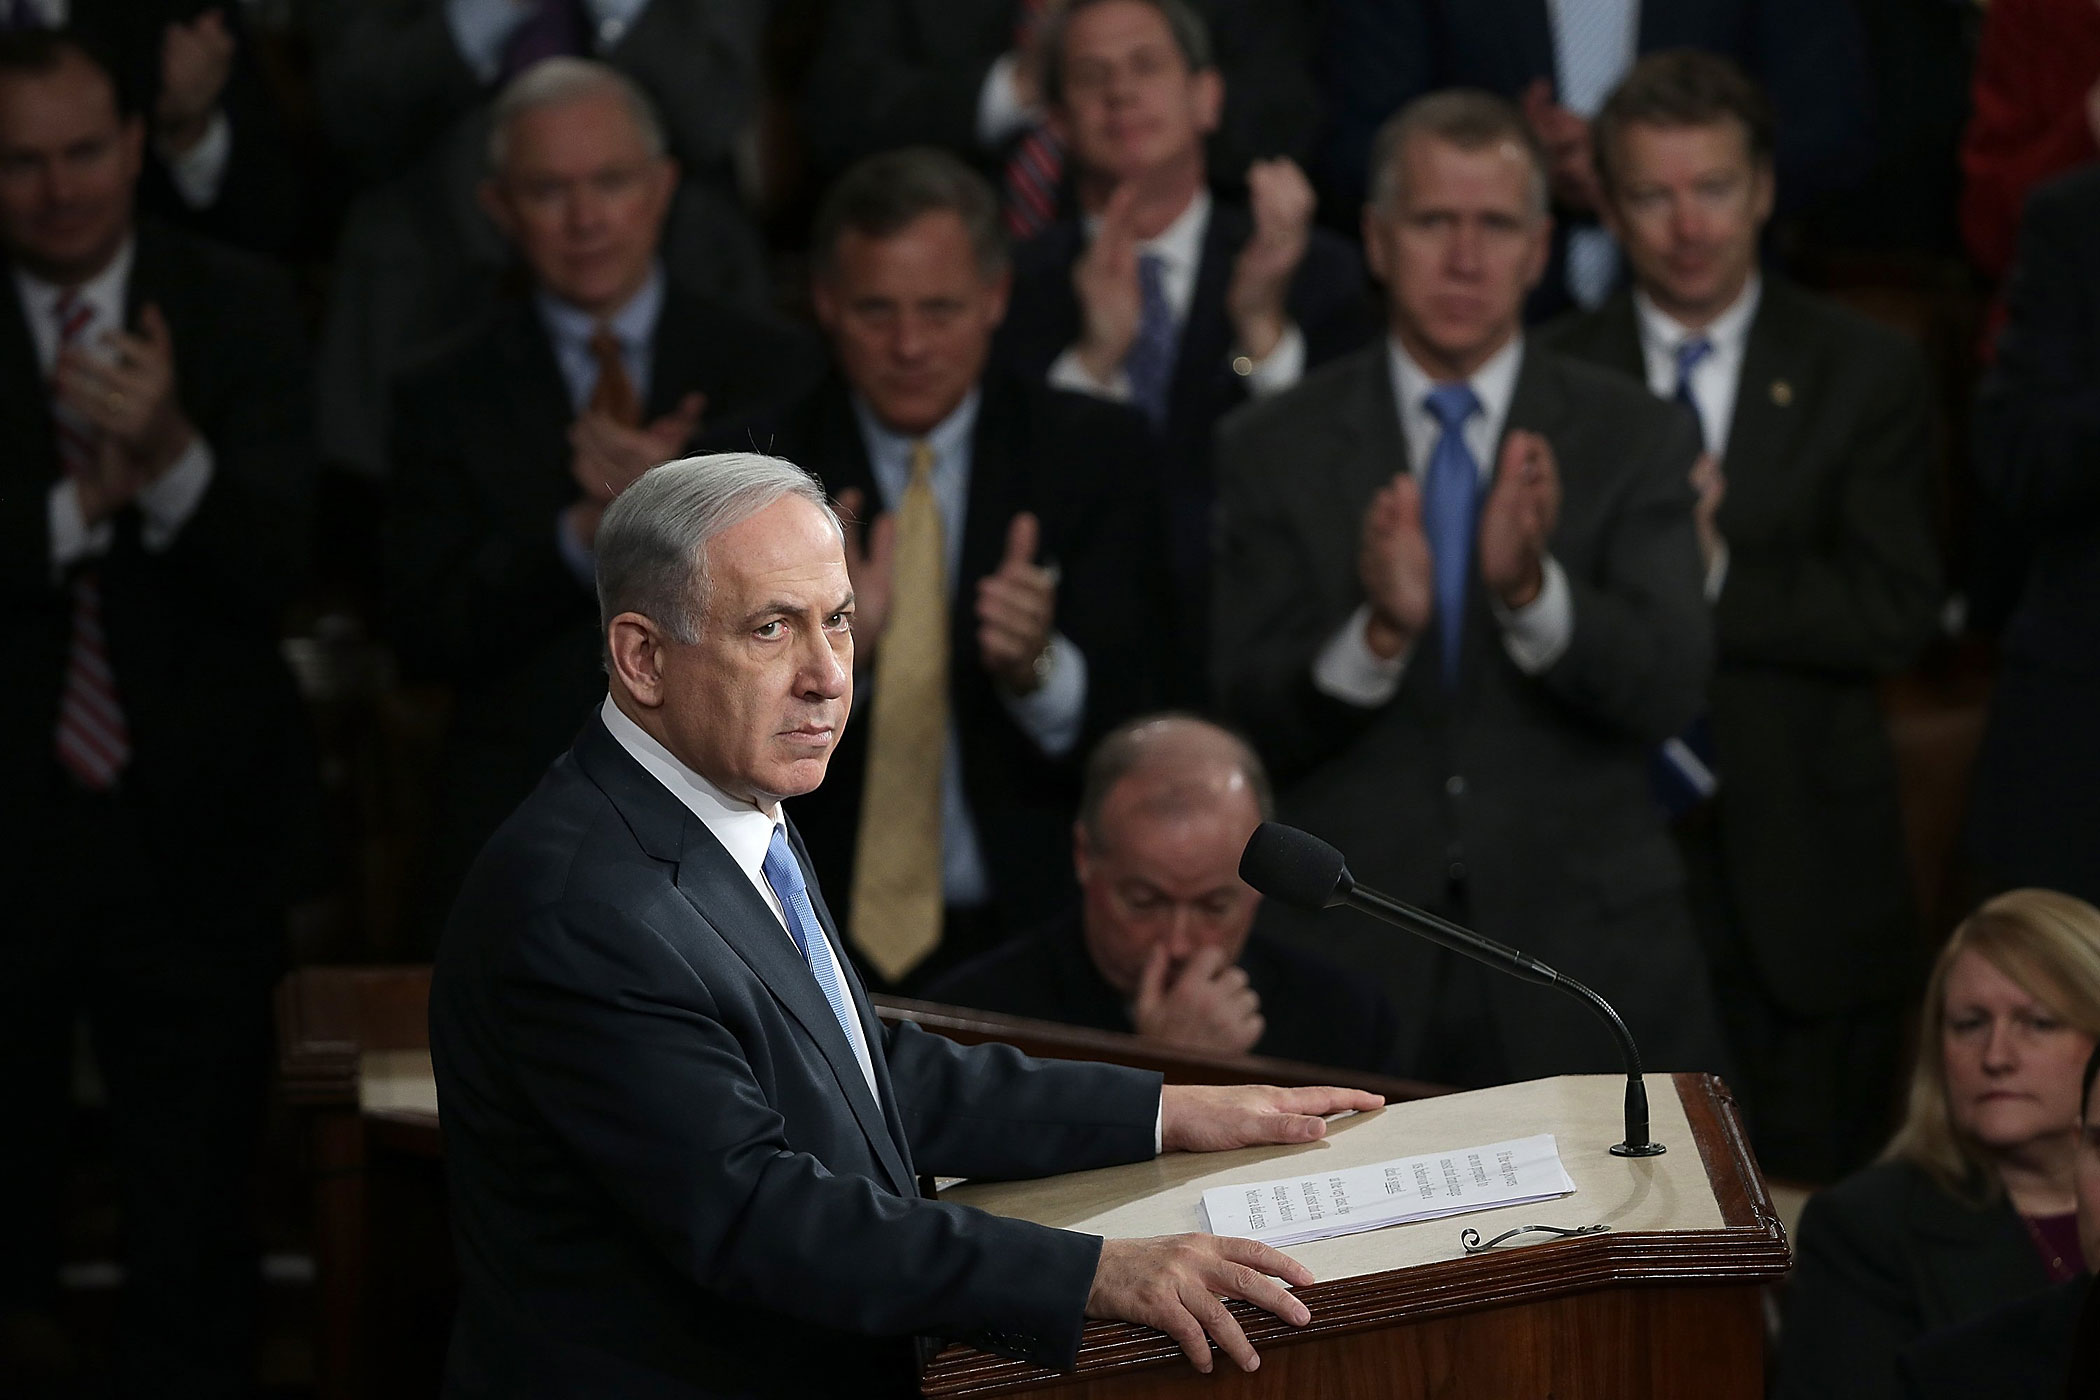 Israeli Prime Minister Benjamin Netanyahu addresses a joint meeting of the United States Congress in the House chamber at the U.S. Capitol on March 3, 2015 in Washington, DC. (Win McNamee—Getty Images)